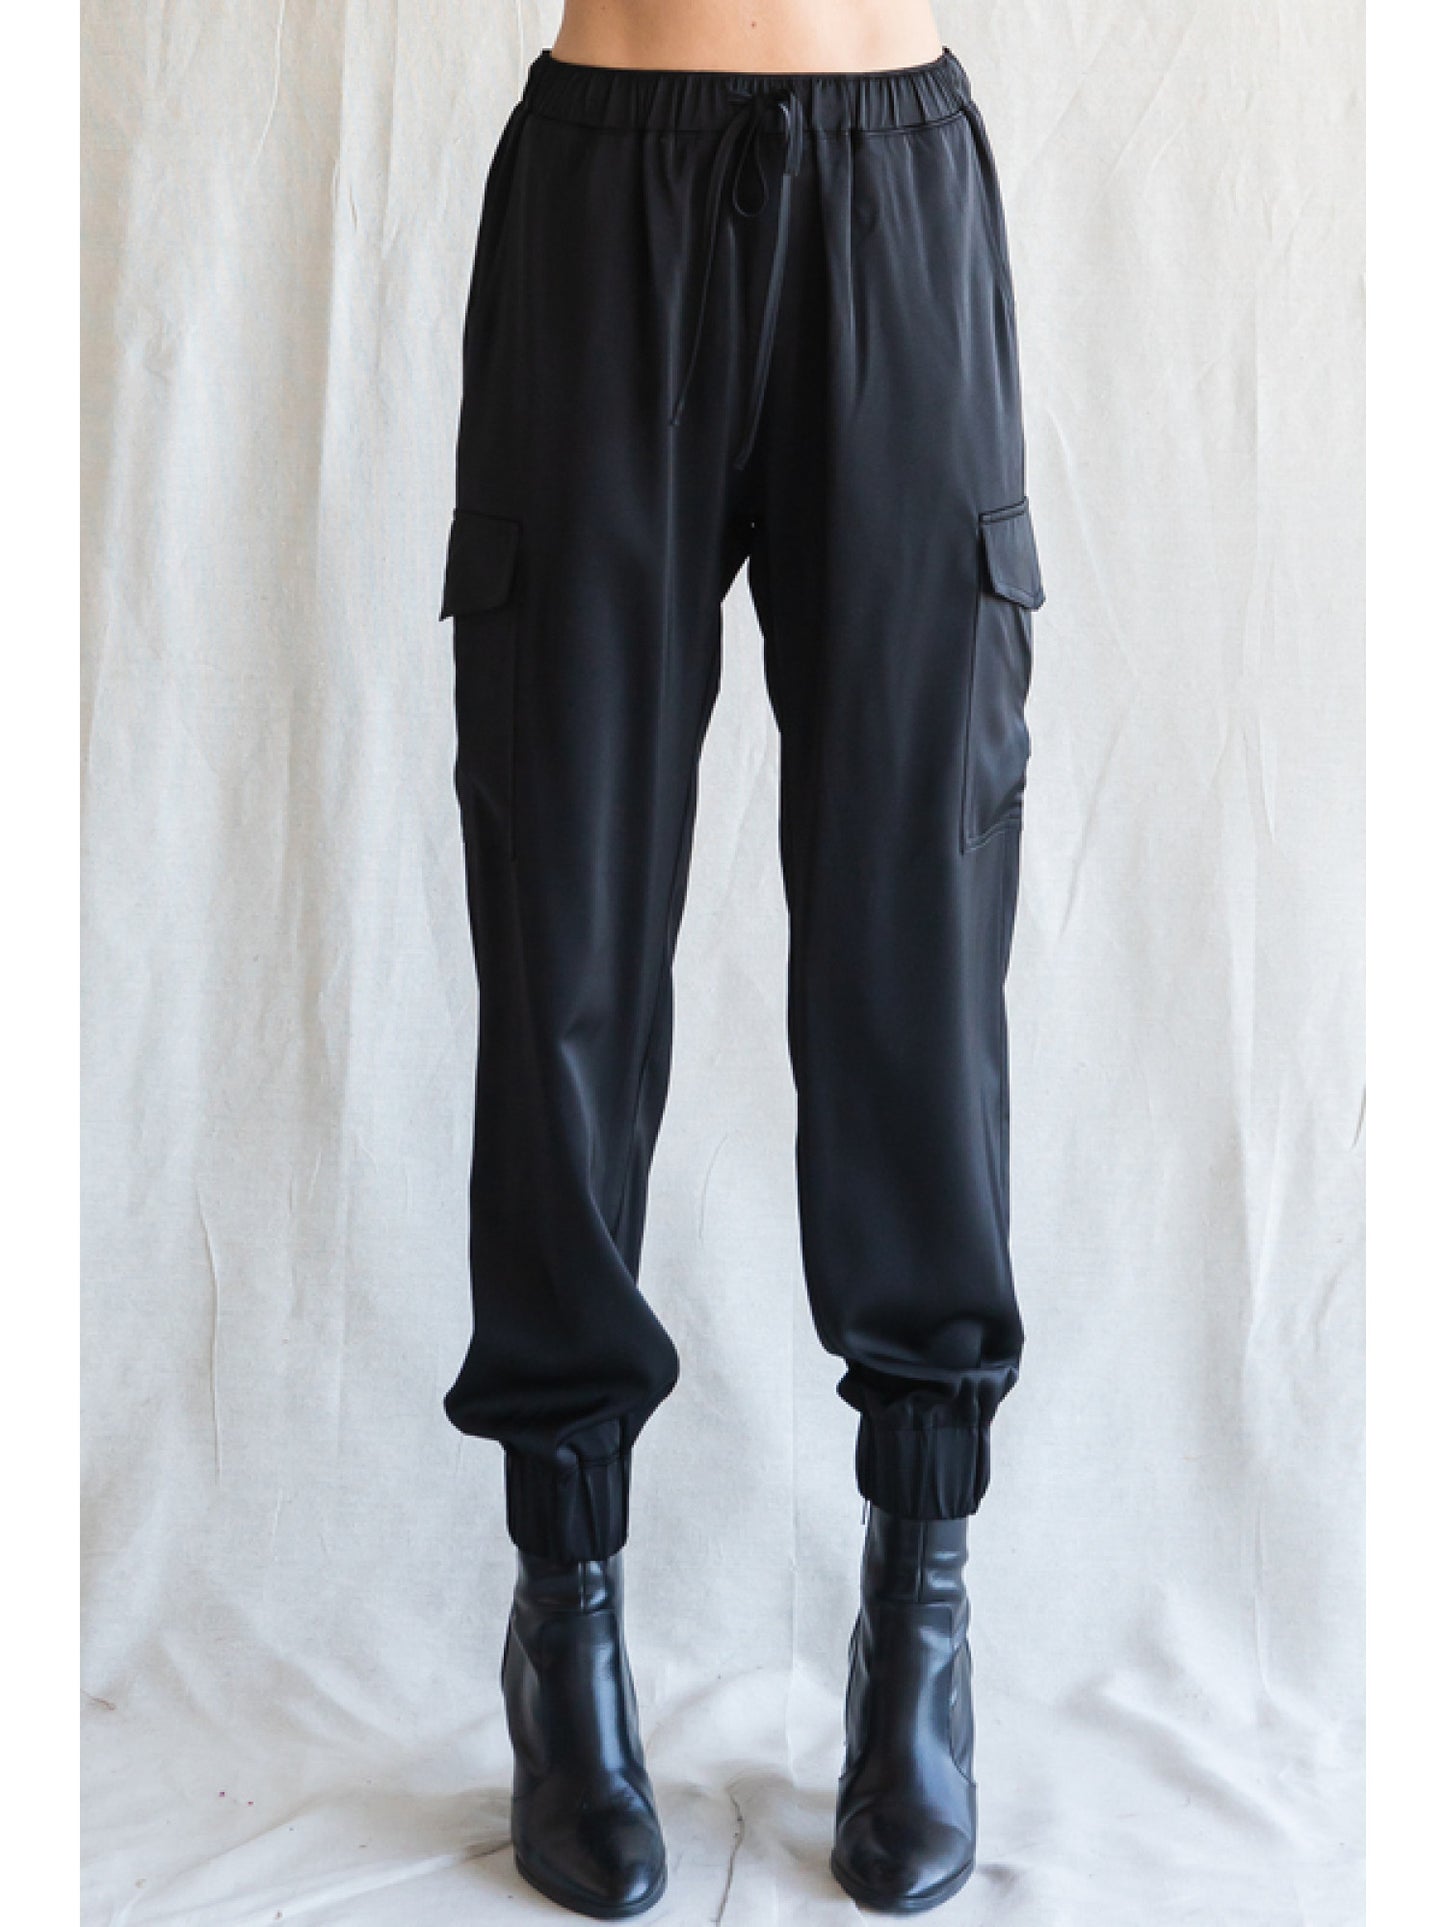 Travel Light Satin Cargo Pants 2 Colors (Small to Large)